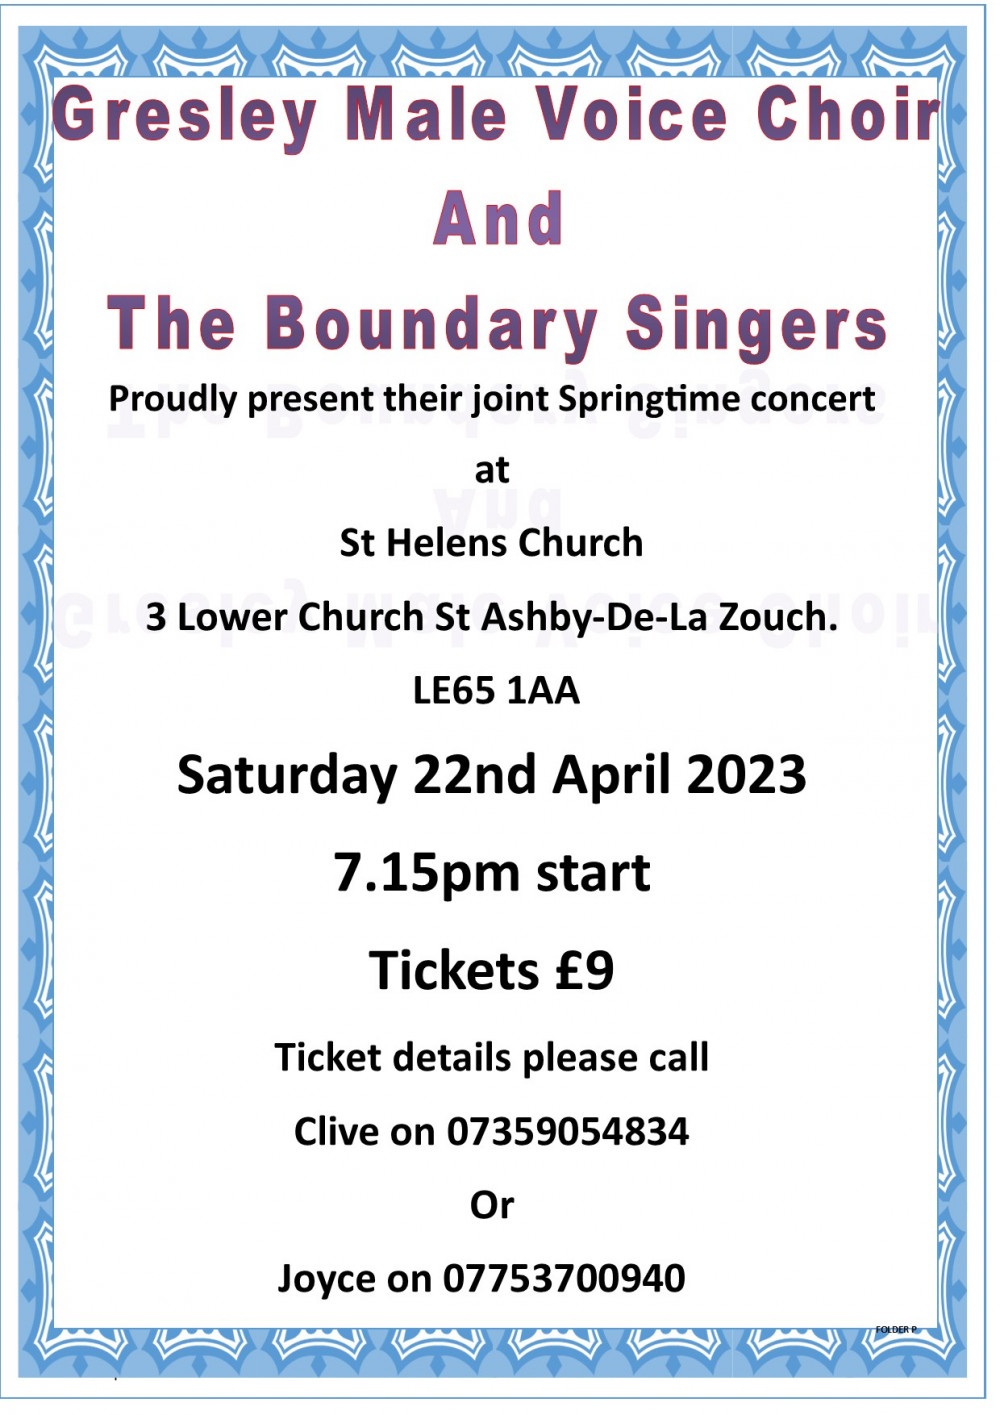 Gresley Male Voice Choir & Boundary Singers in Concert at St Helen's Church, Ashby de la Zouch